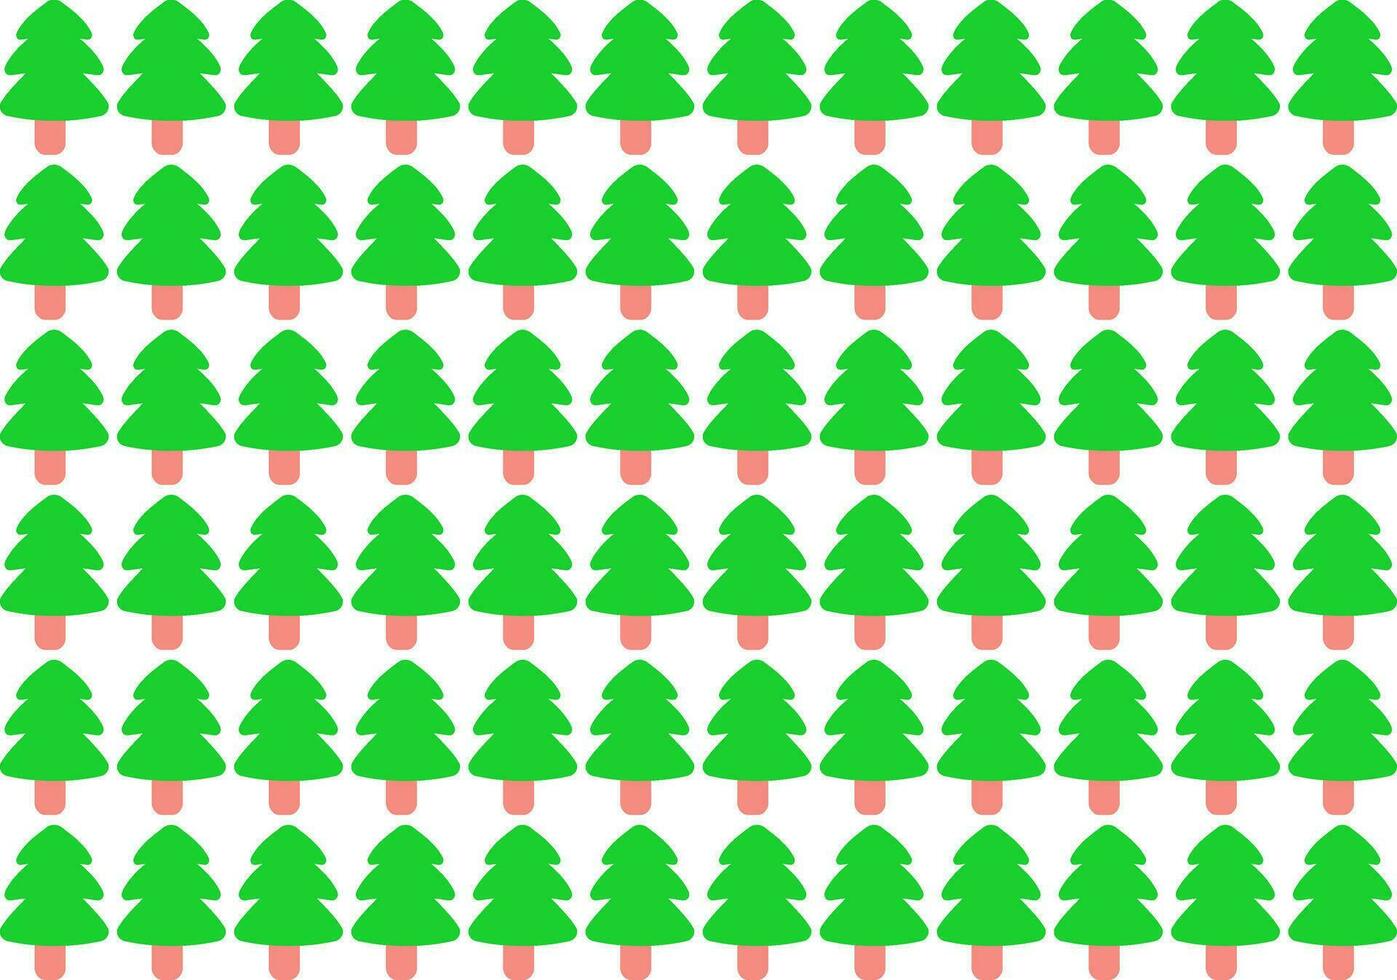 Simple Christmas Tree Vector Patterns Background Lovely Winter Holidays Print vector illustration